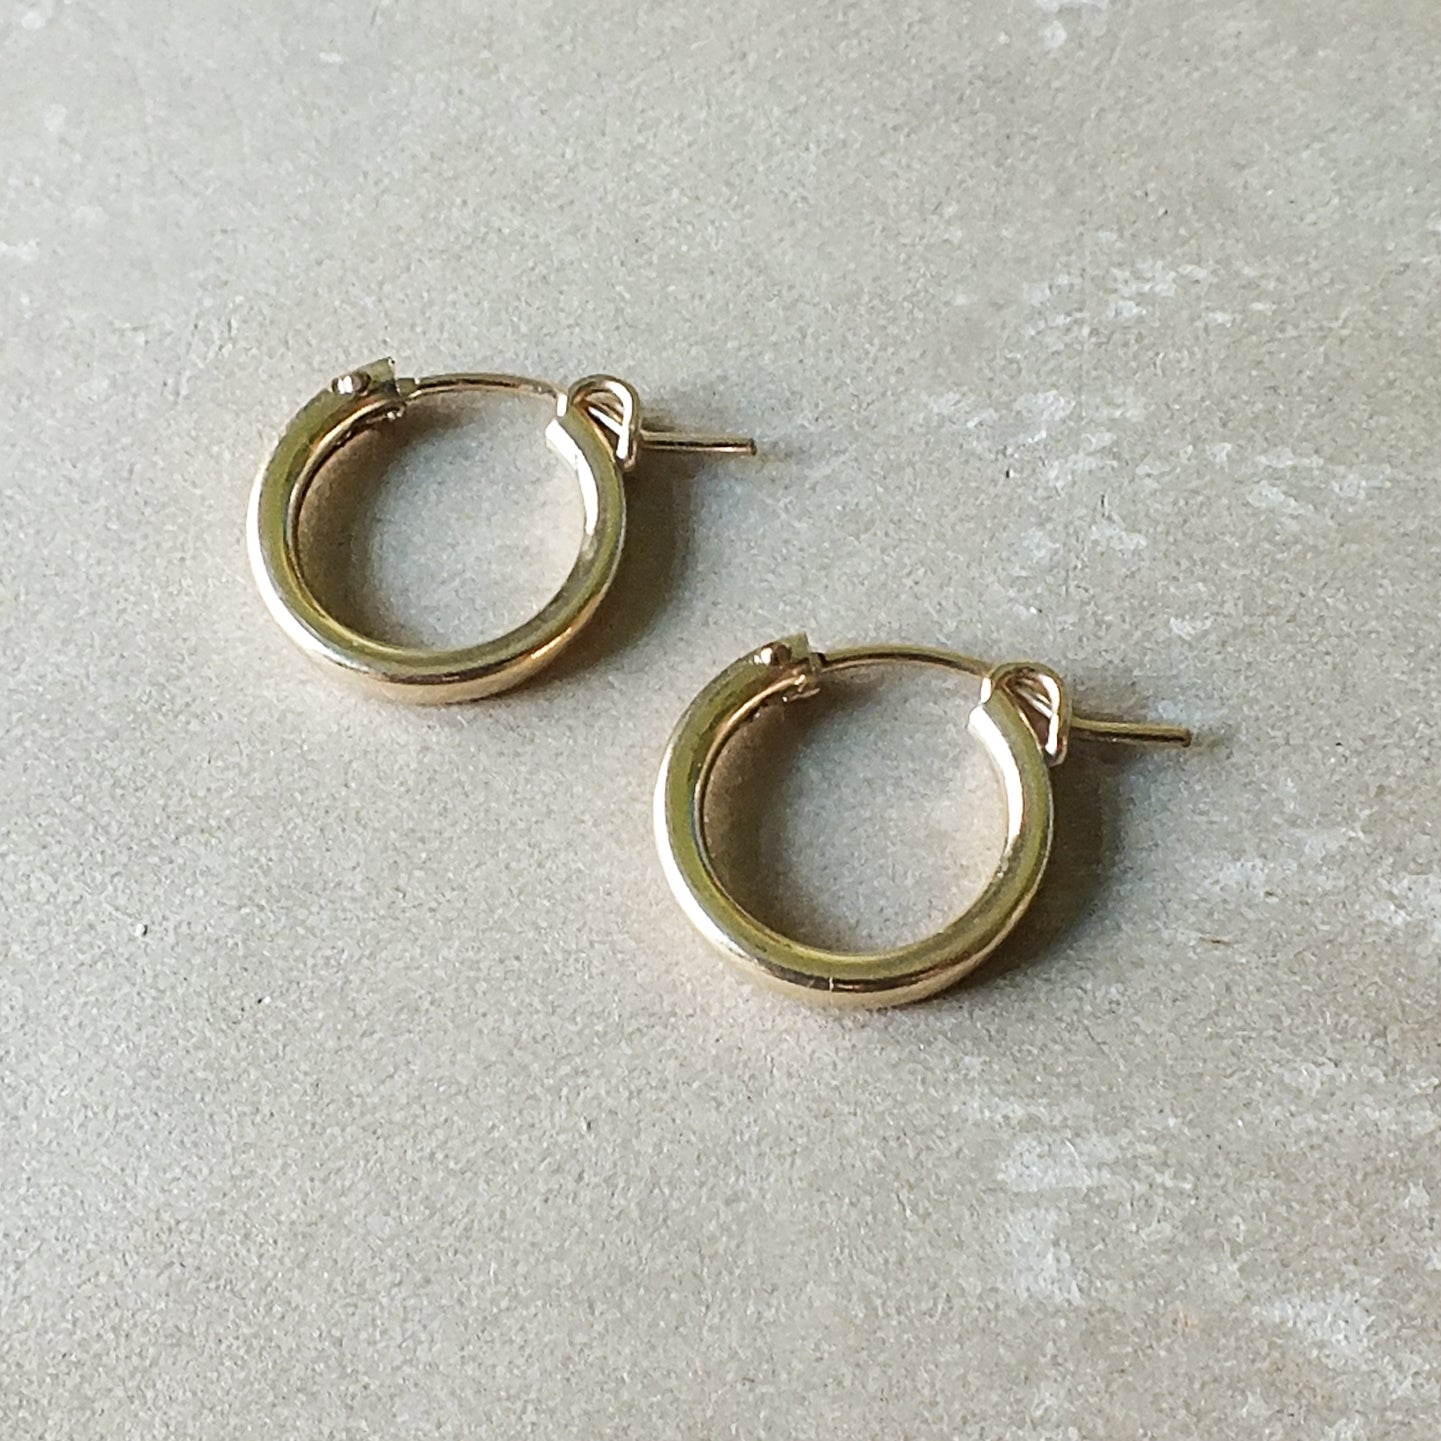 A pair of Becoming Jewelry Everyday Hoop Earrings, medium on a gray surface.